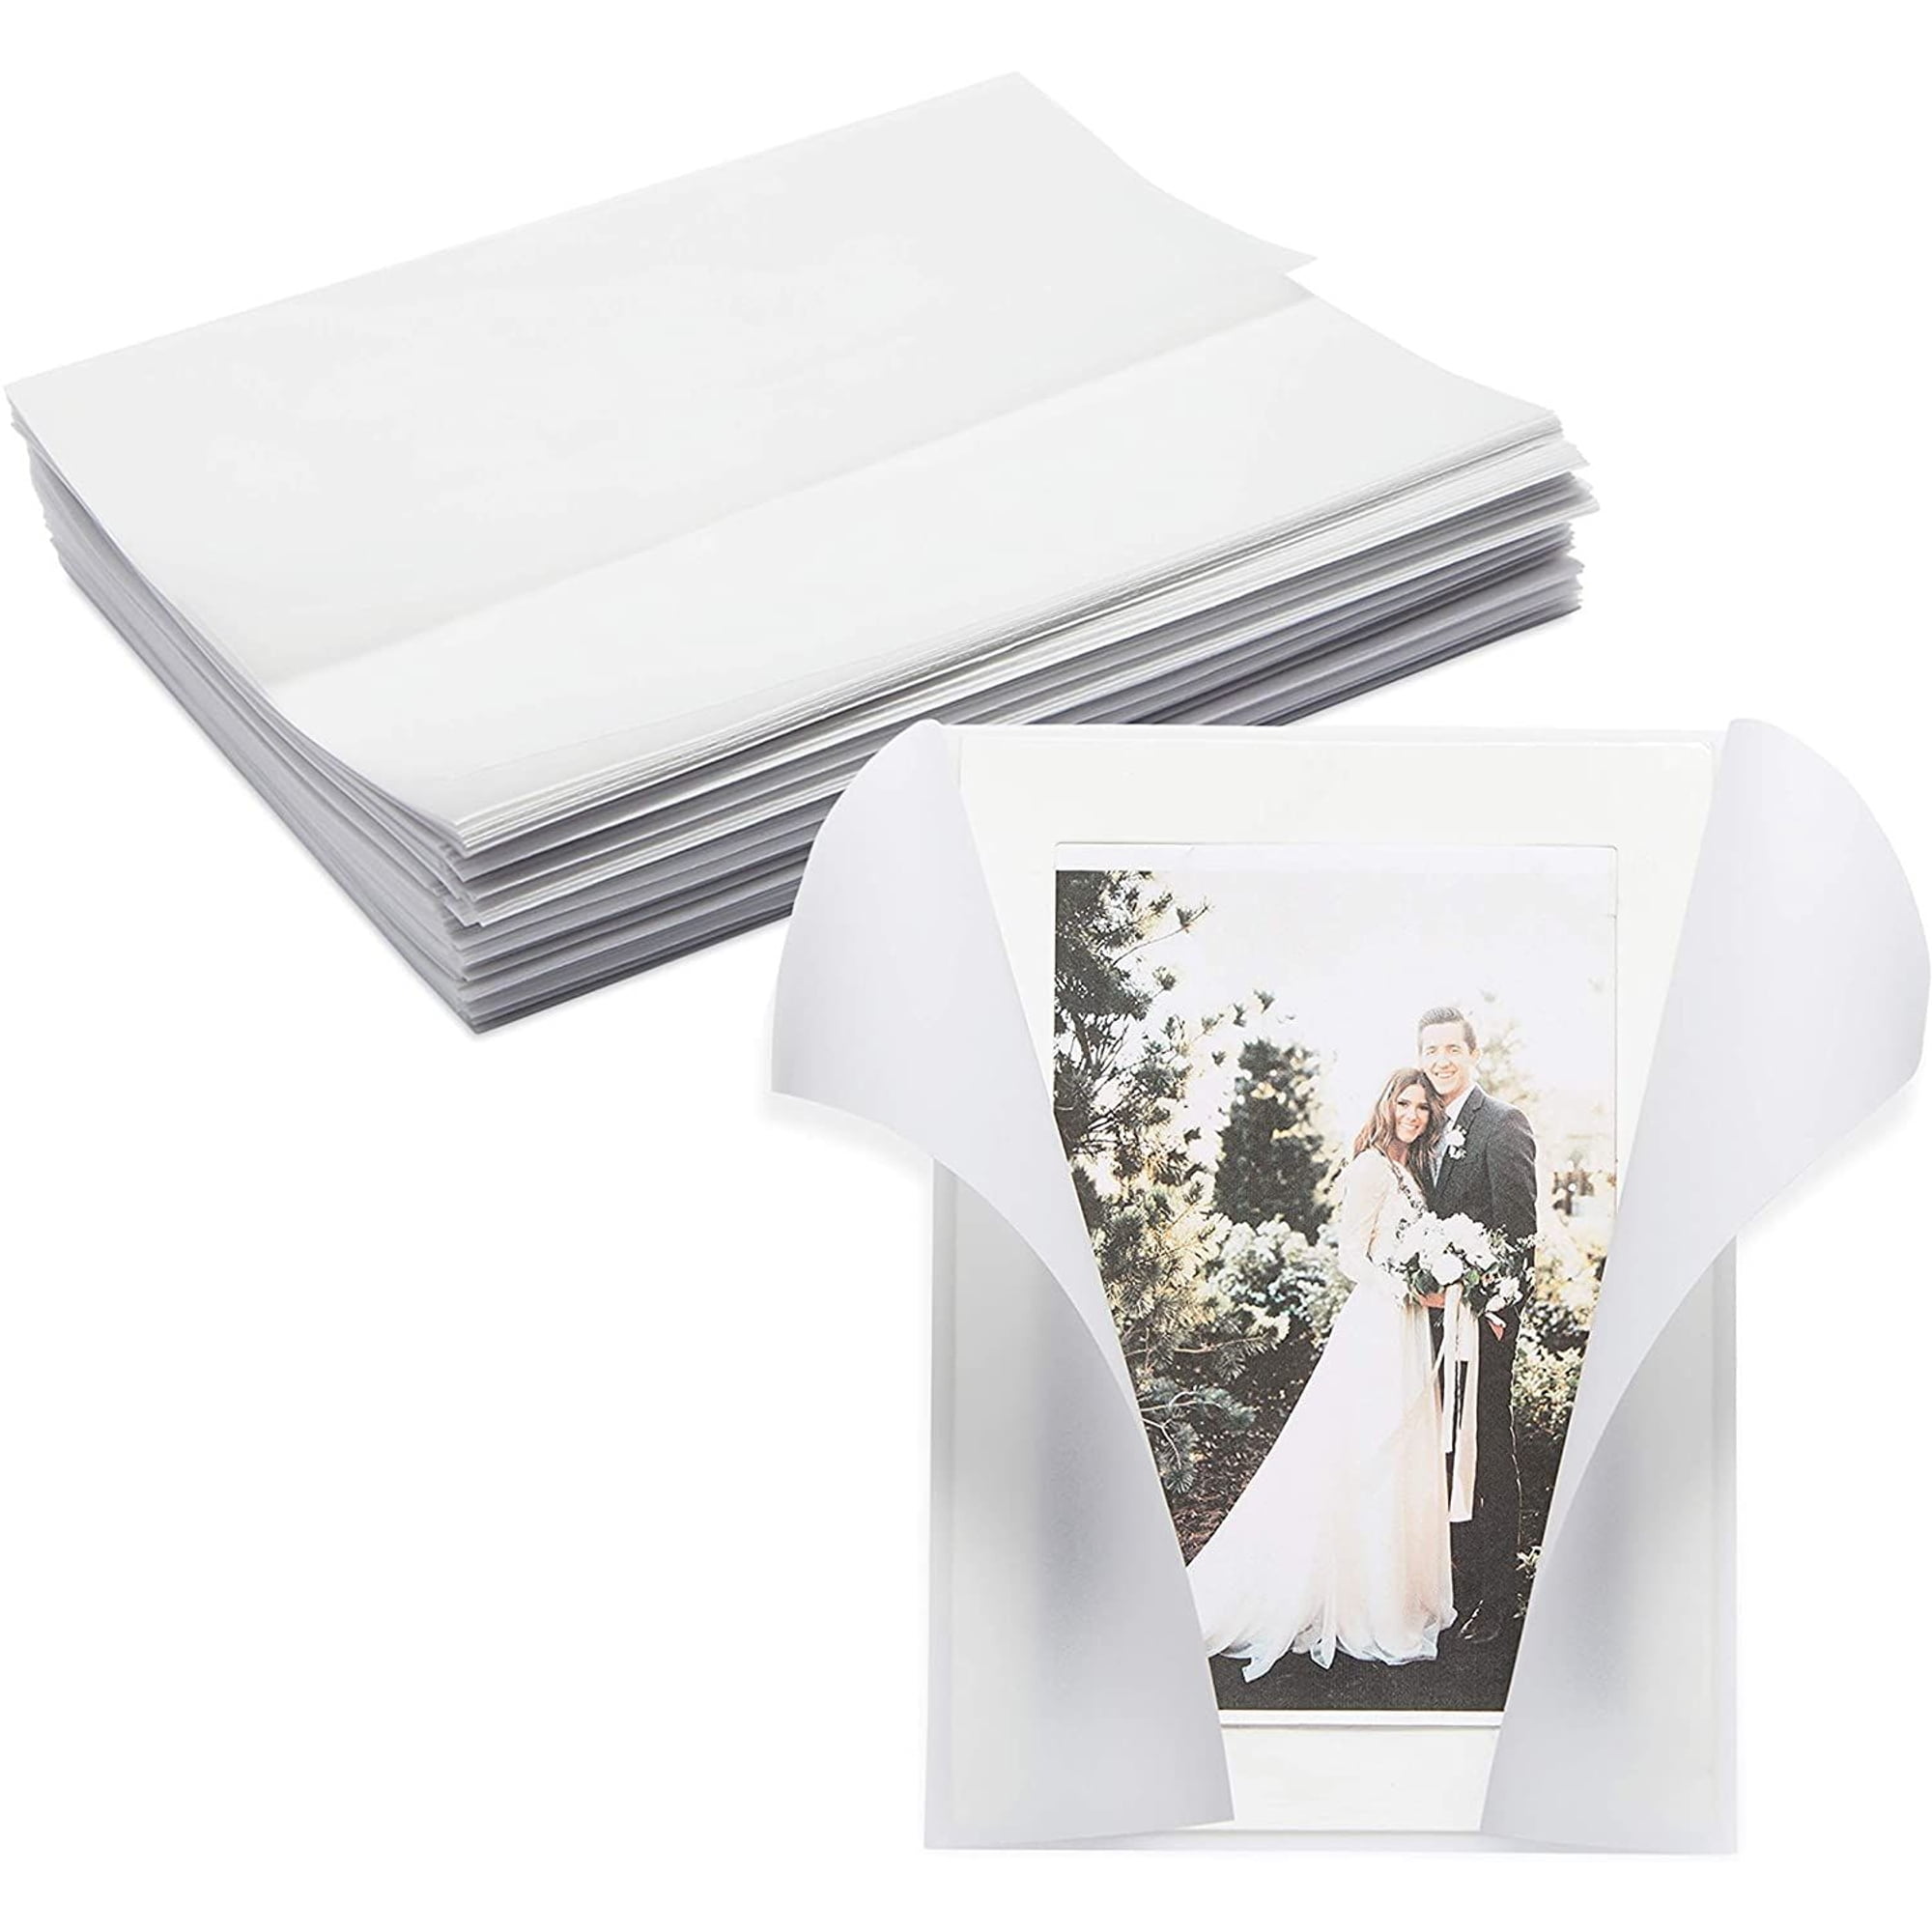 ZYNERY 70 Pack Pre-folded Vellum Jackets for 5x7 Invitations, Vellum Paper  5x7 for Invitations, Transparent Paper Vellum Envelopes for Wedding